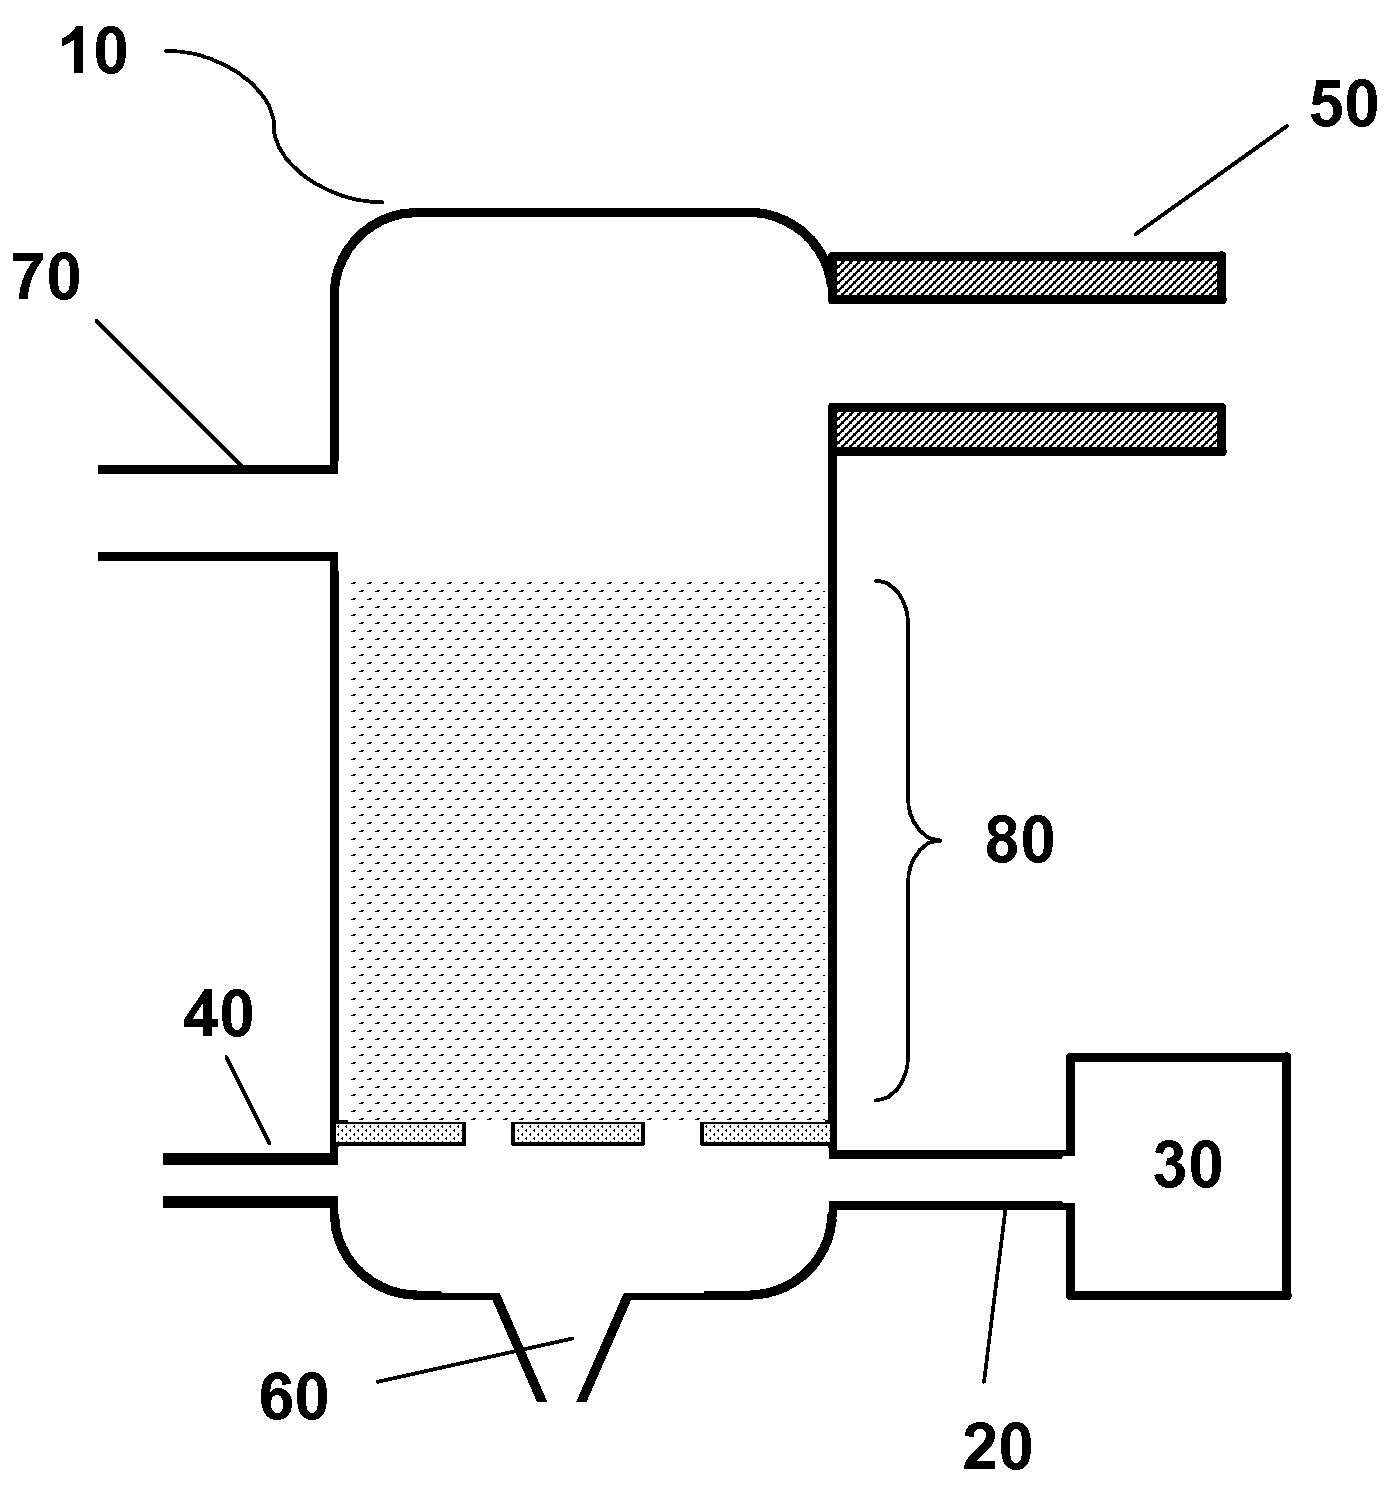 Steam Generating Slurry Gasifier for the Catalytic Gasification of a Carbonaceous Feedstock